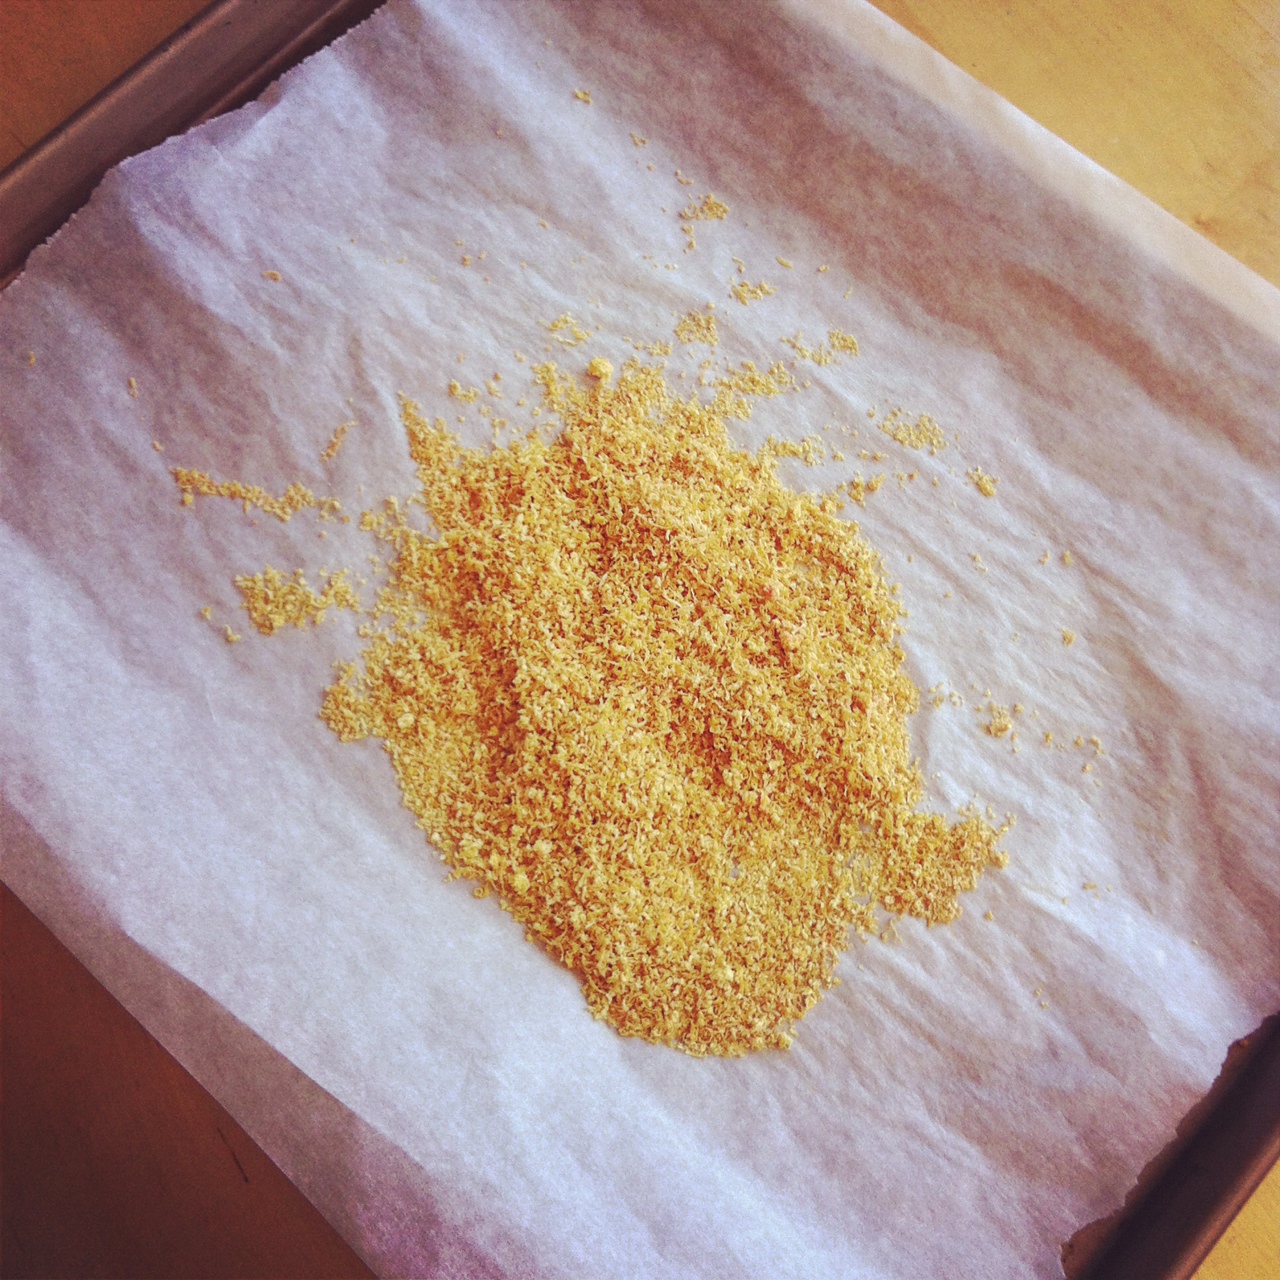 Grated lemon rind after drying